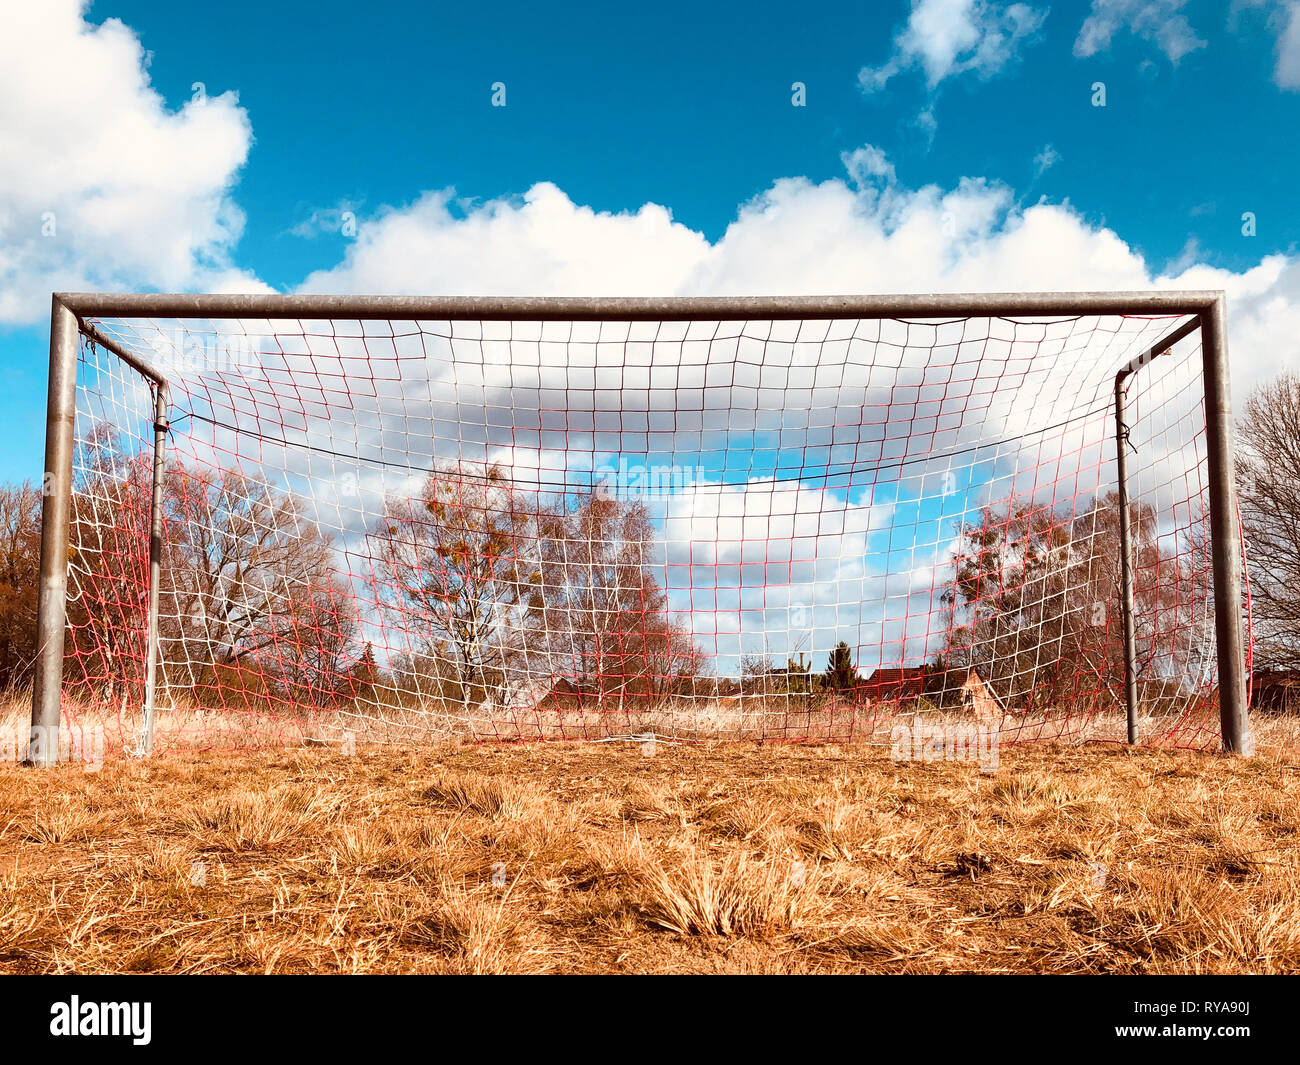 soccer goal on countryside, low angle view of rural soccer field - Stock Photo